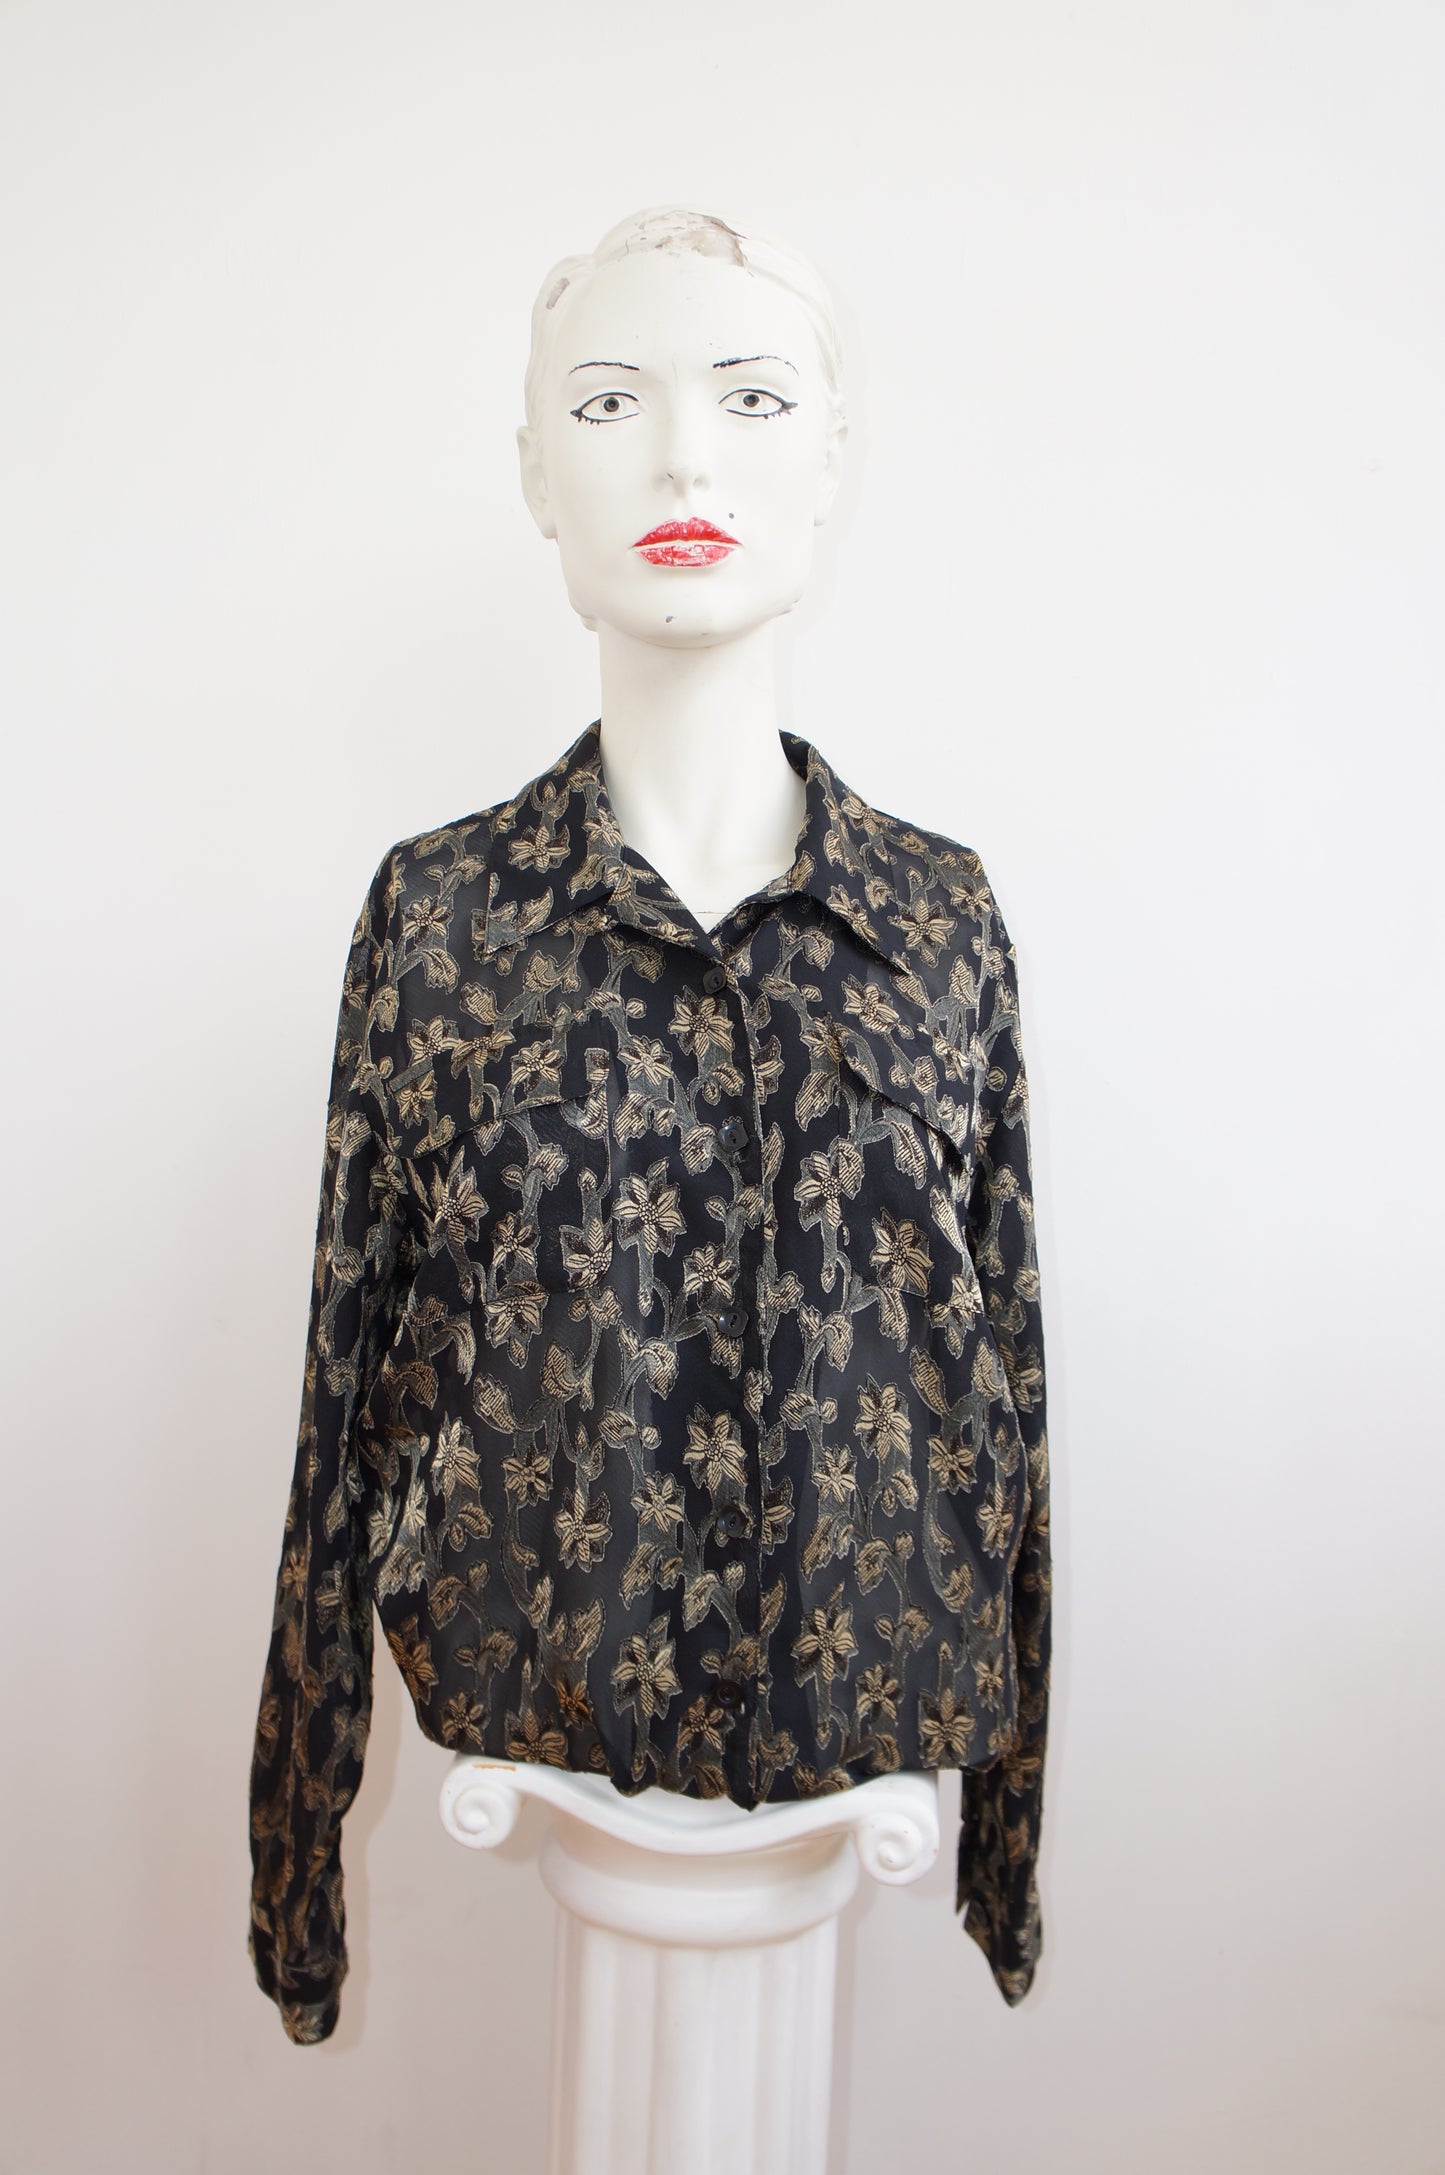 Transparent shirt with beige flowers